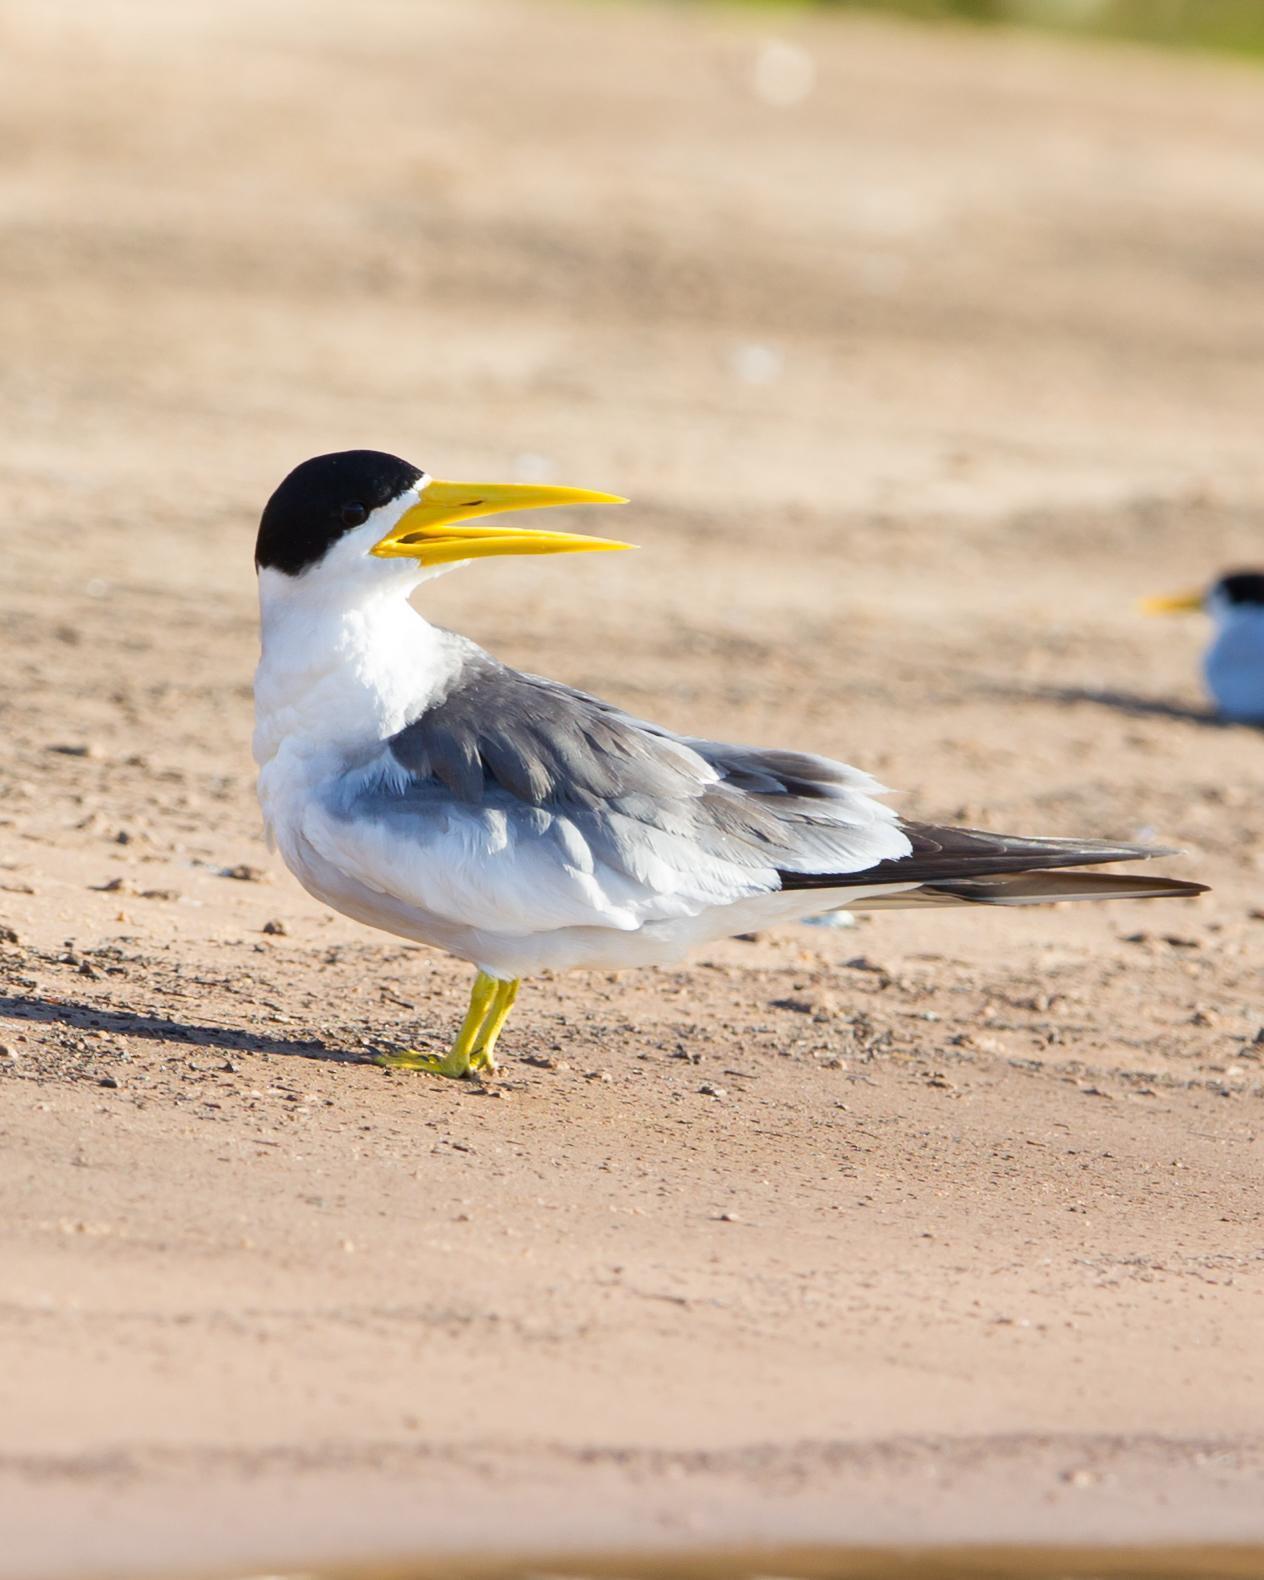 Large-billed Tern Photo by Kevin Berkoff